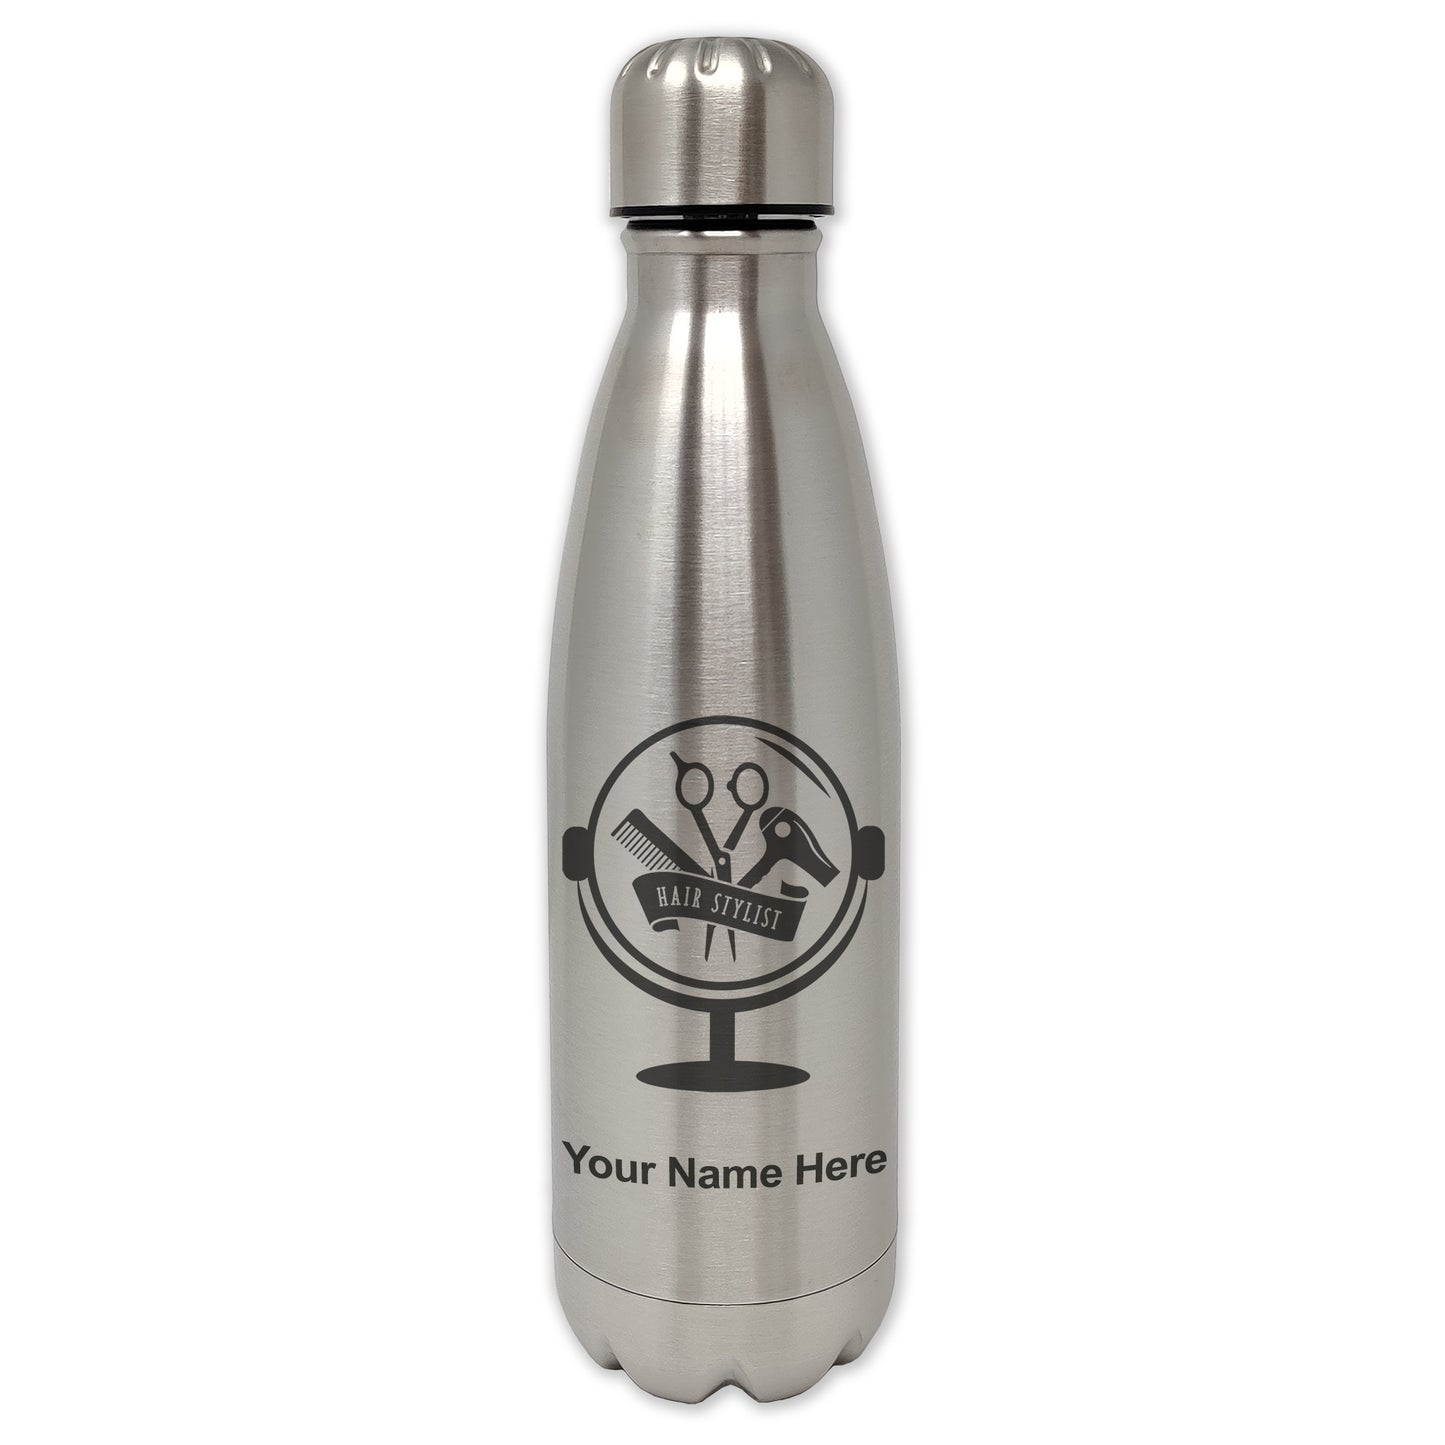 LaserGram Double Wall Water Bottle, Hair Stylist, Personalized Engraving Included